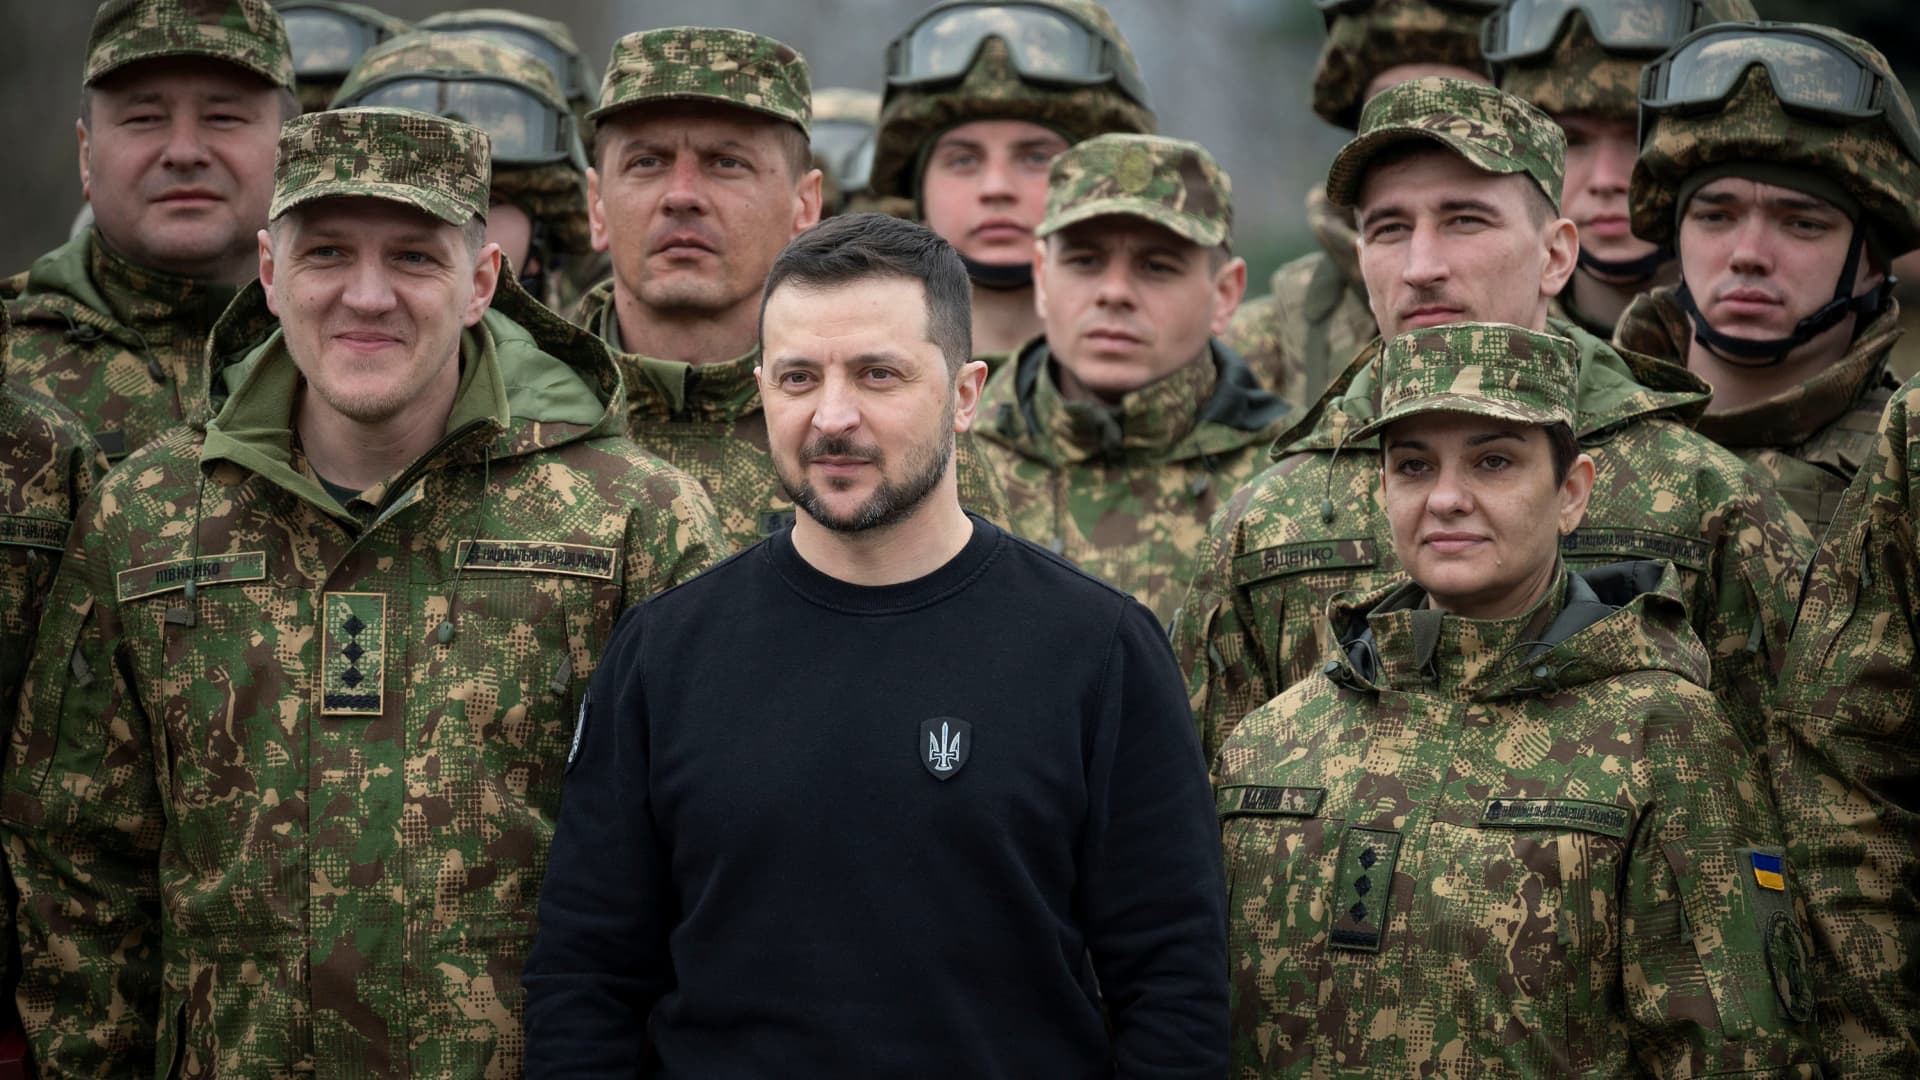 Ukraine's President Volodymyr Zelenskiy poses for a picture with officers during a ceremony marking the 9th anniversary of the National Guard of Ukraine, amid Russia's attack on Ukraine, at a compound of the World War II Museum in Kyiv, Ukraine March 24, 2023. 